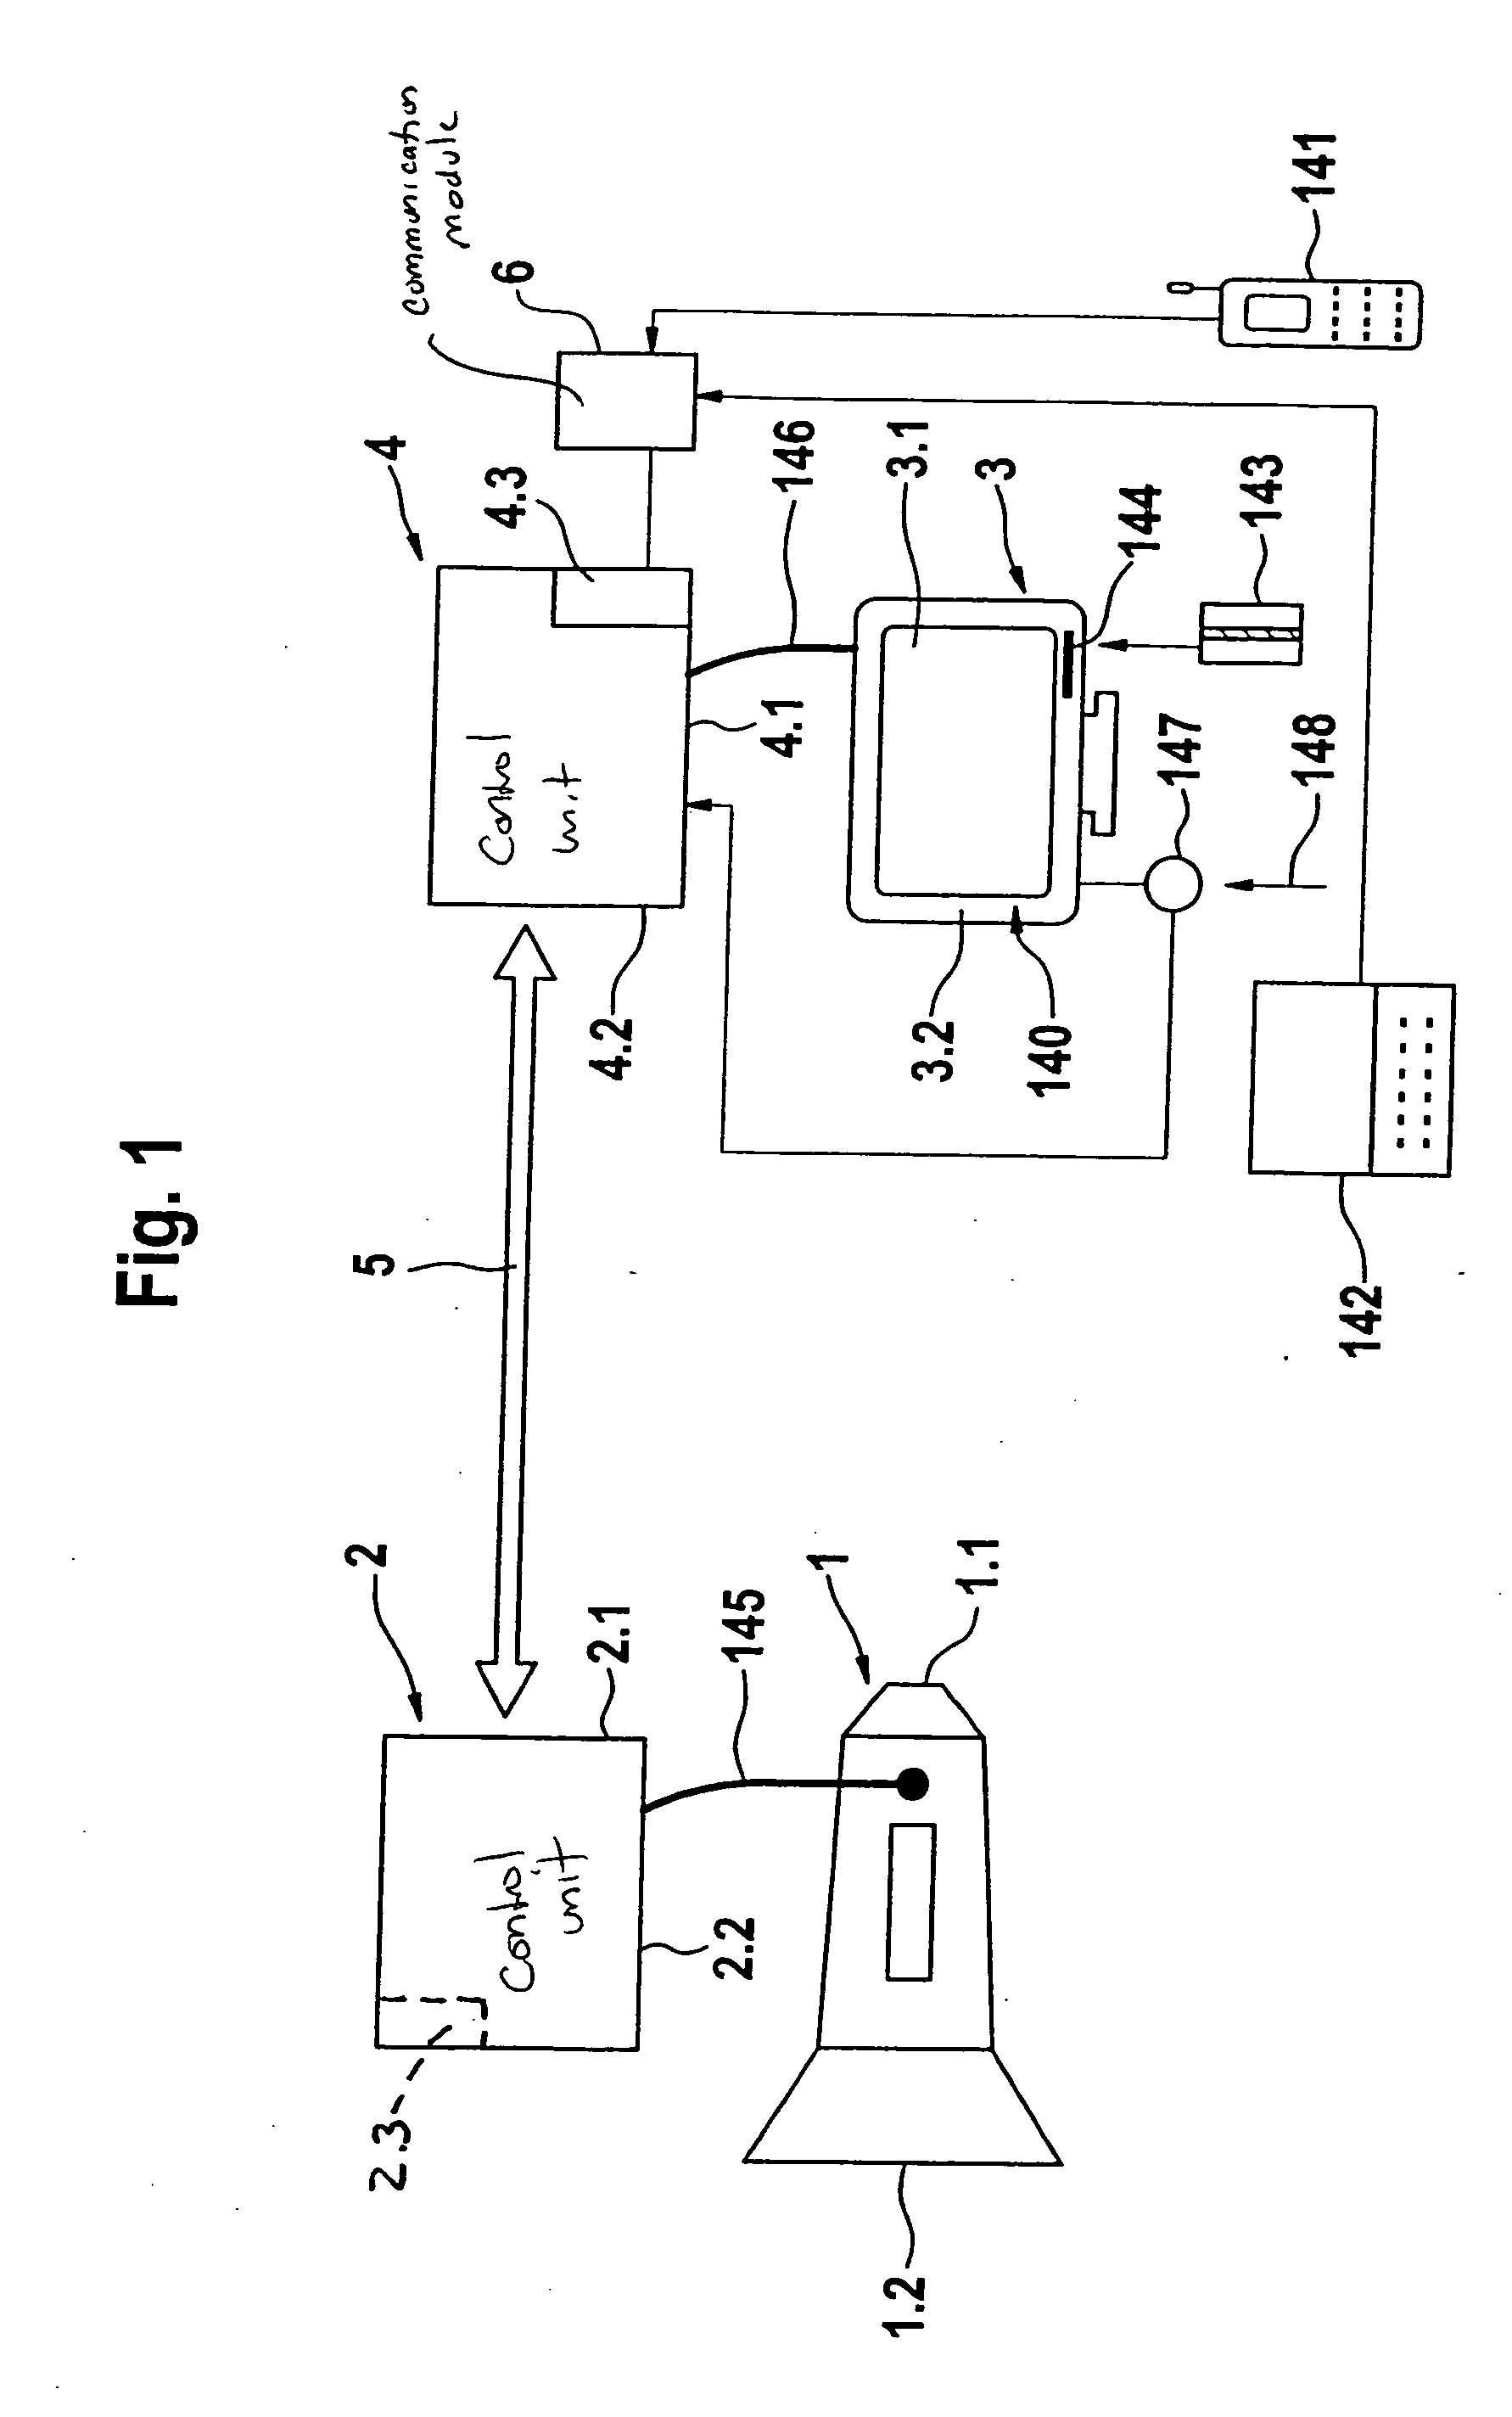 Method for configuring a transmission control for motor vehicles